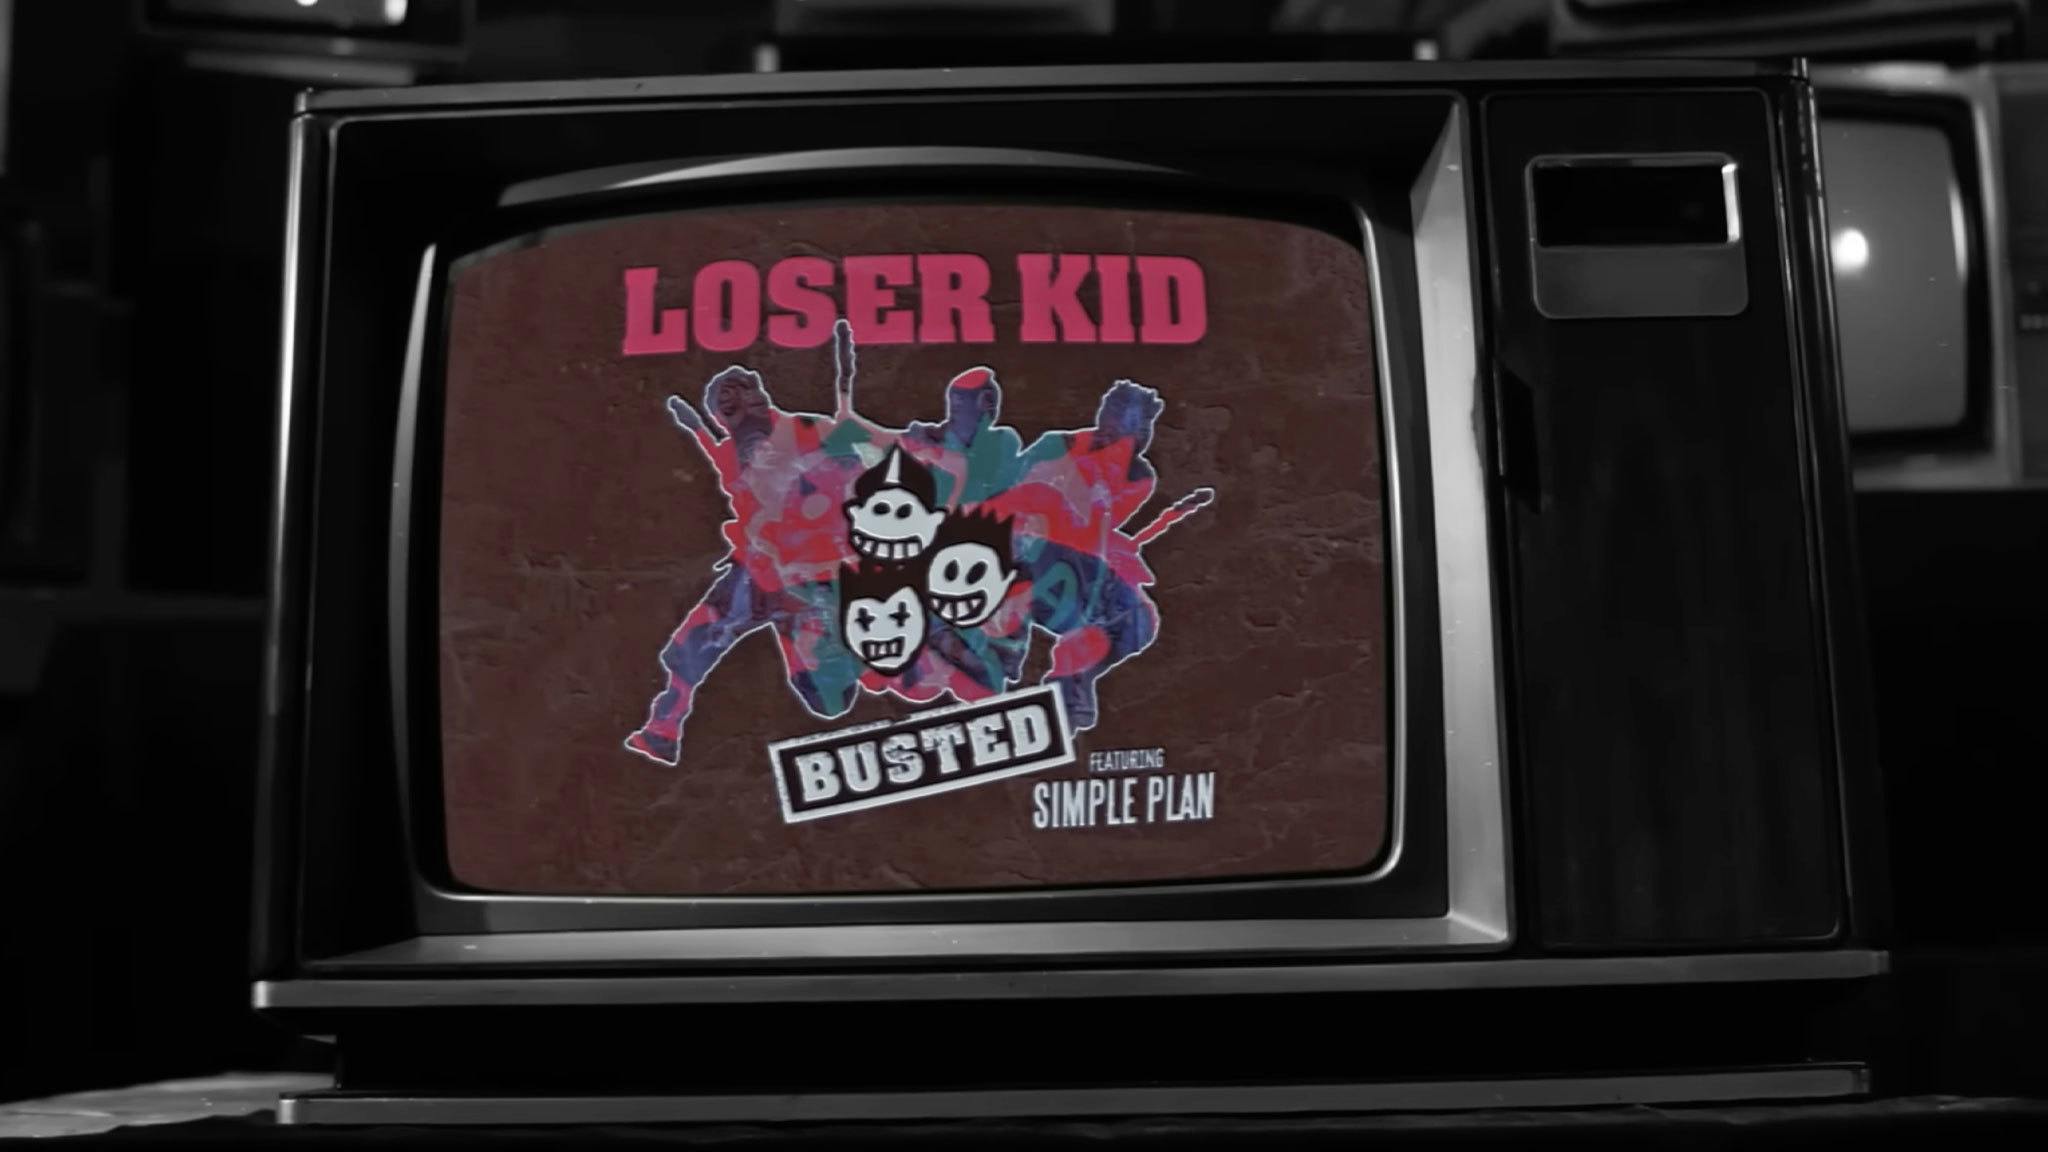 Listen: Simple Plan guest on Busted’s new version of Loser Kid